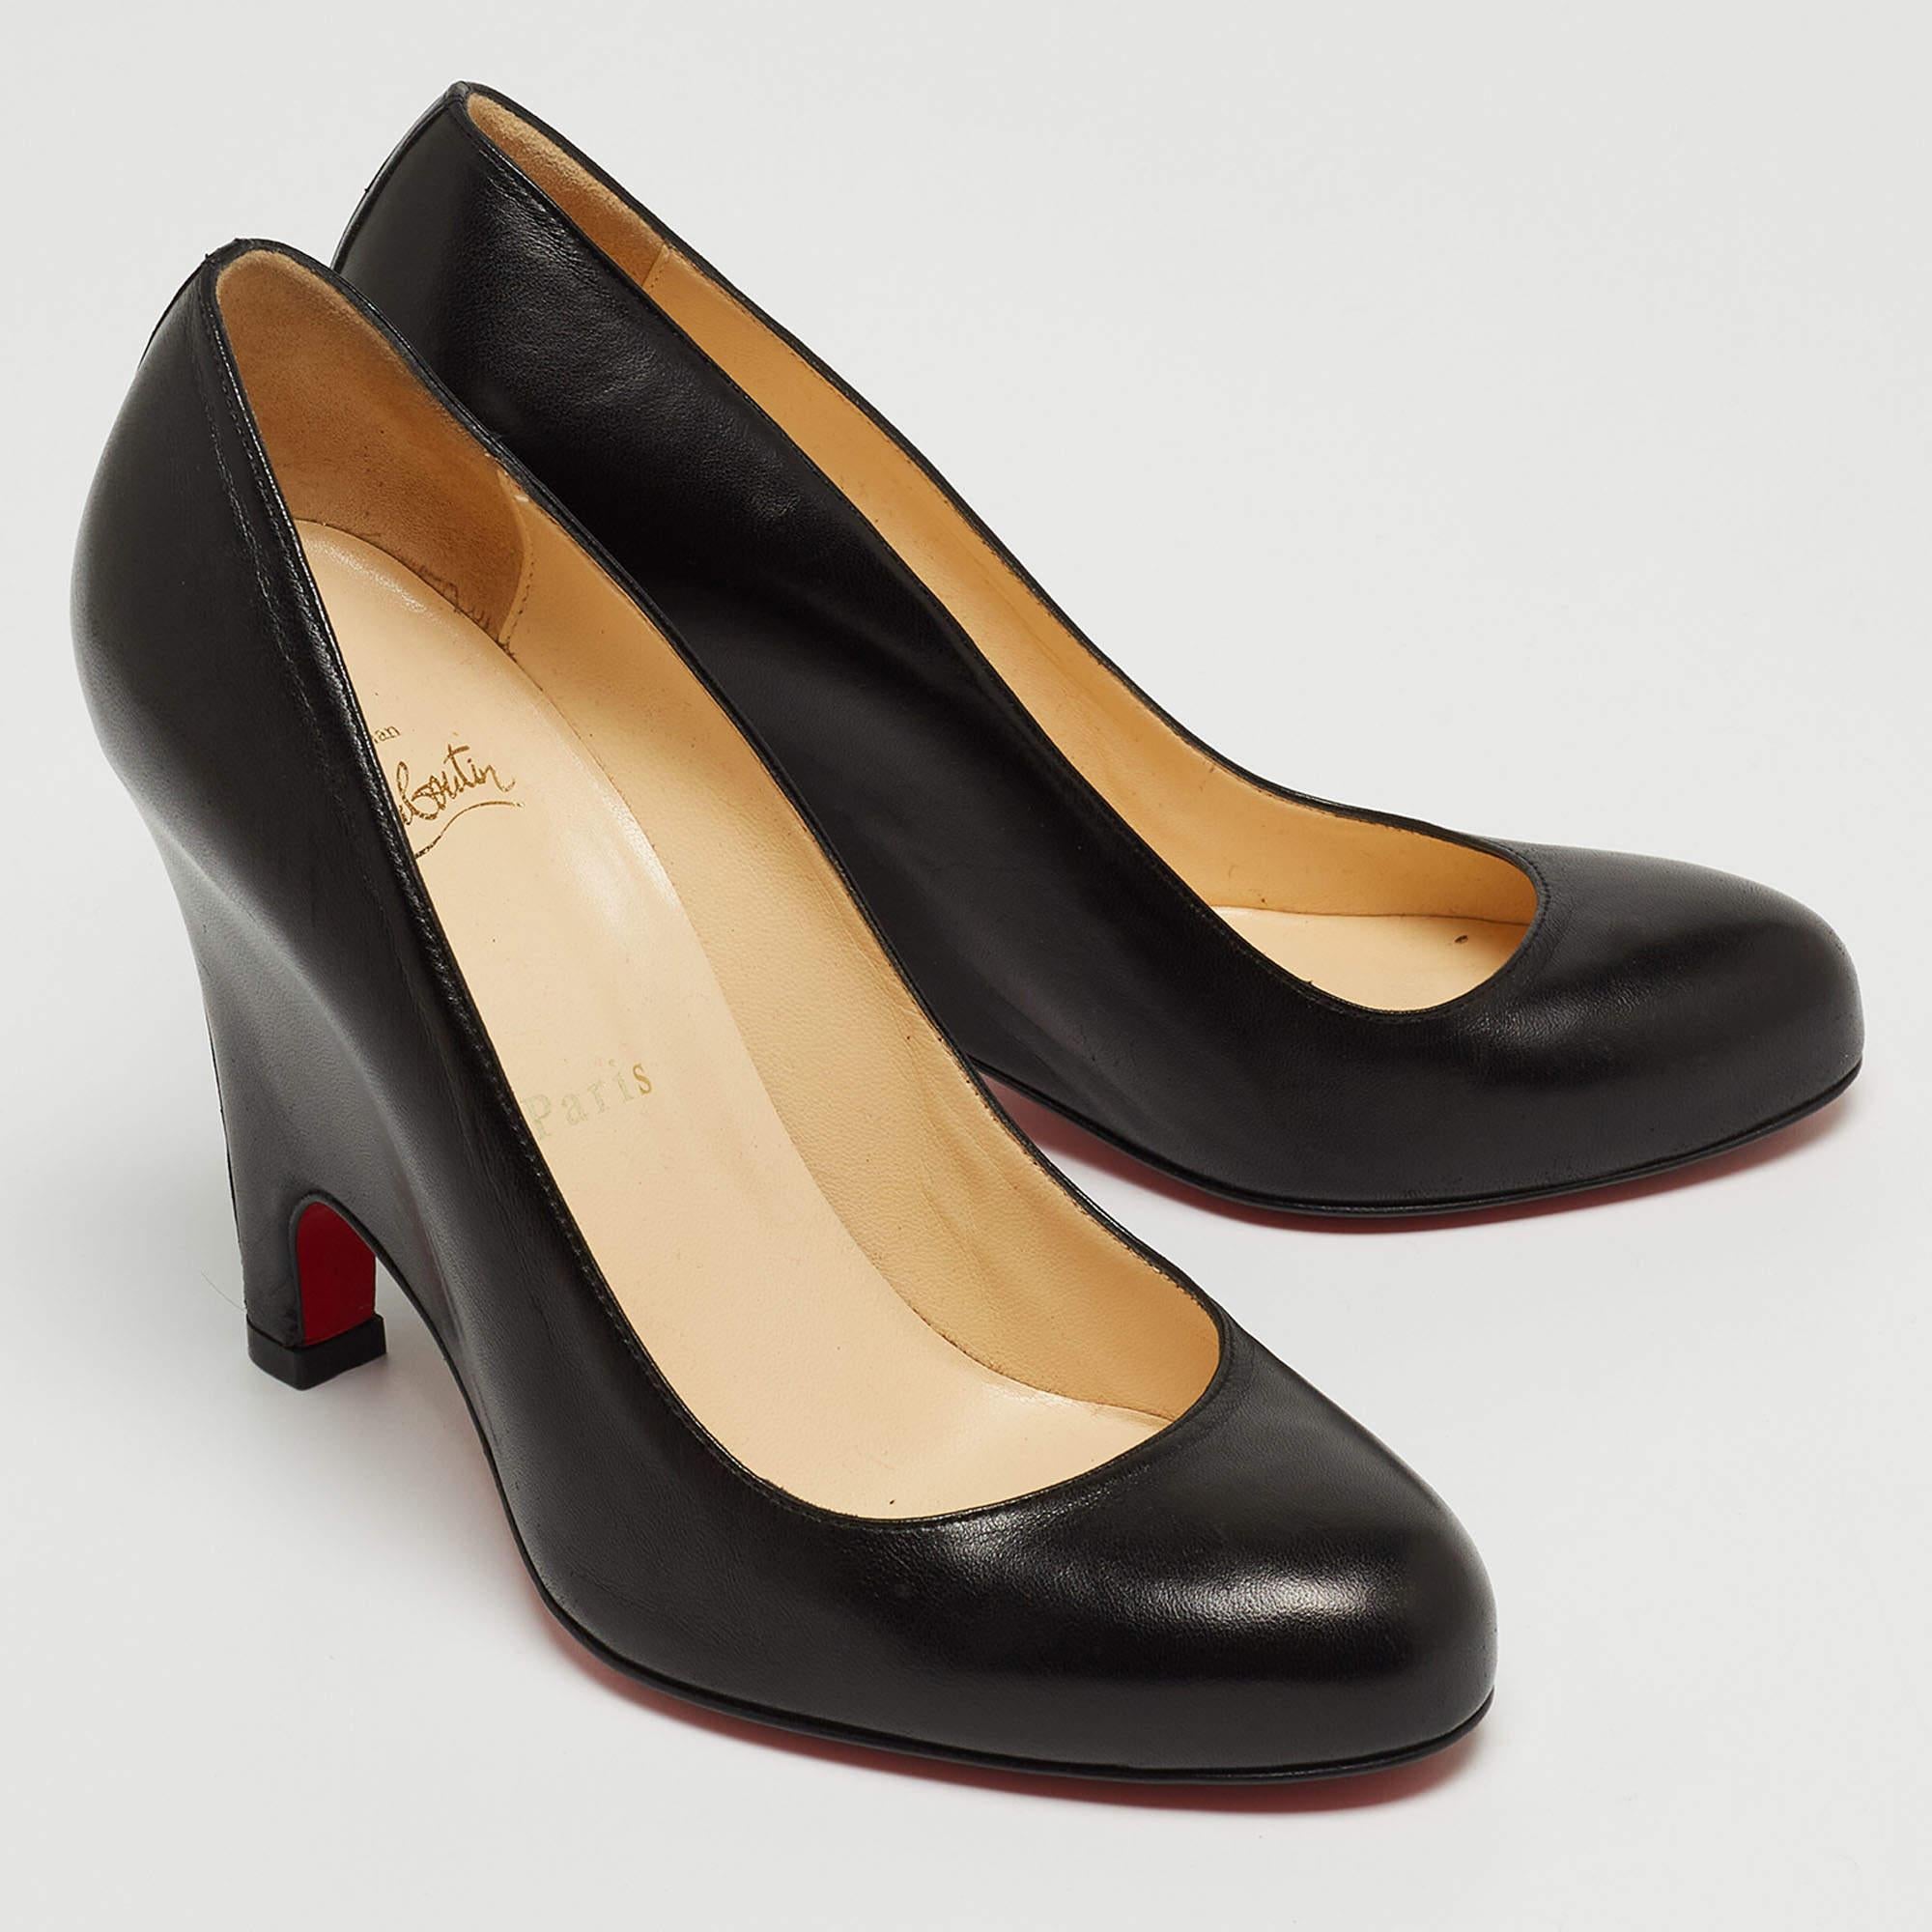 Christian Louboutin Black Leather Simple Wedge Pumps Size 38.5 For Sale 1